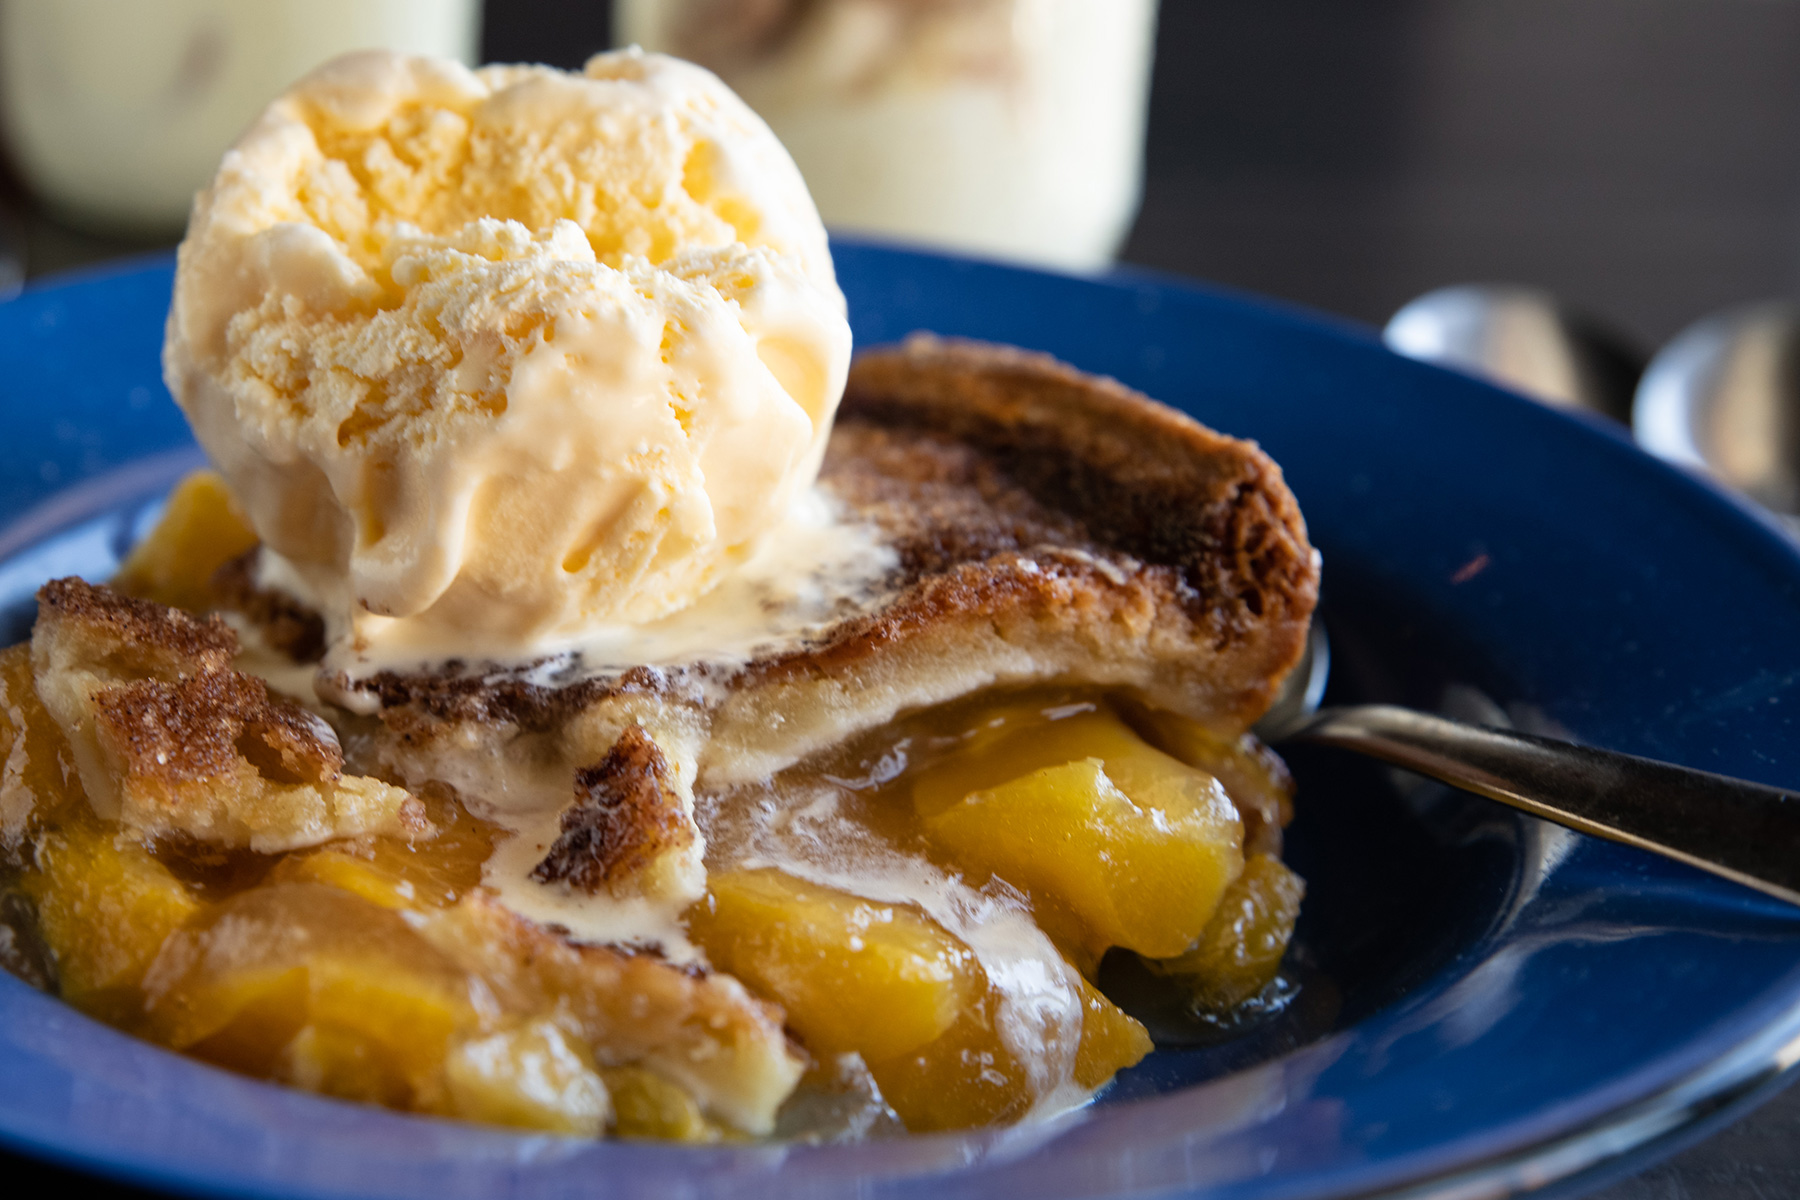 The best peach cobbler and ice cream dessert is served at Hoffbrau Steak & Grill House.